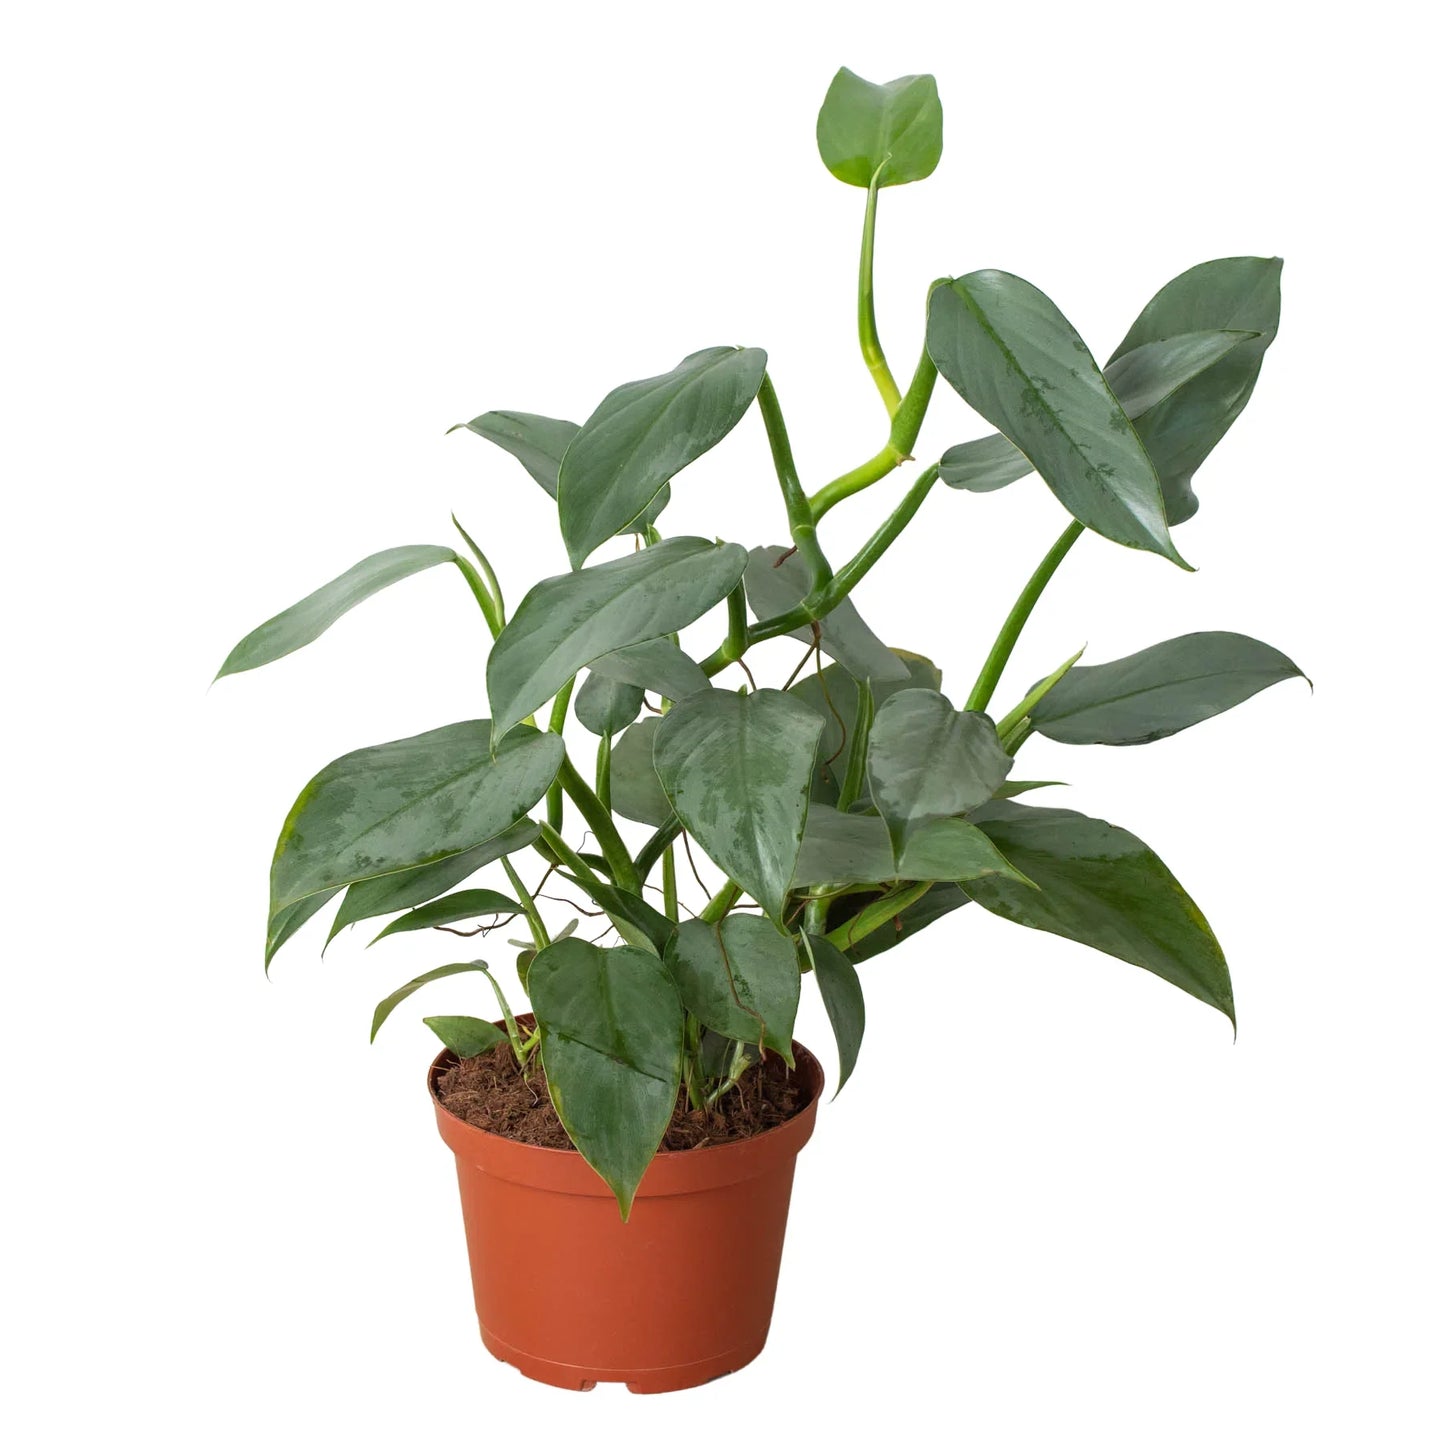 Silver Sword Philodendron - Philodendron Hastatum